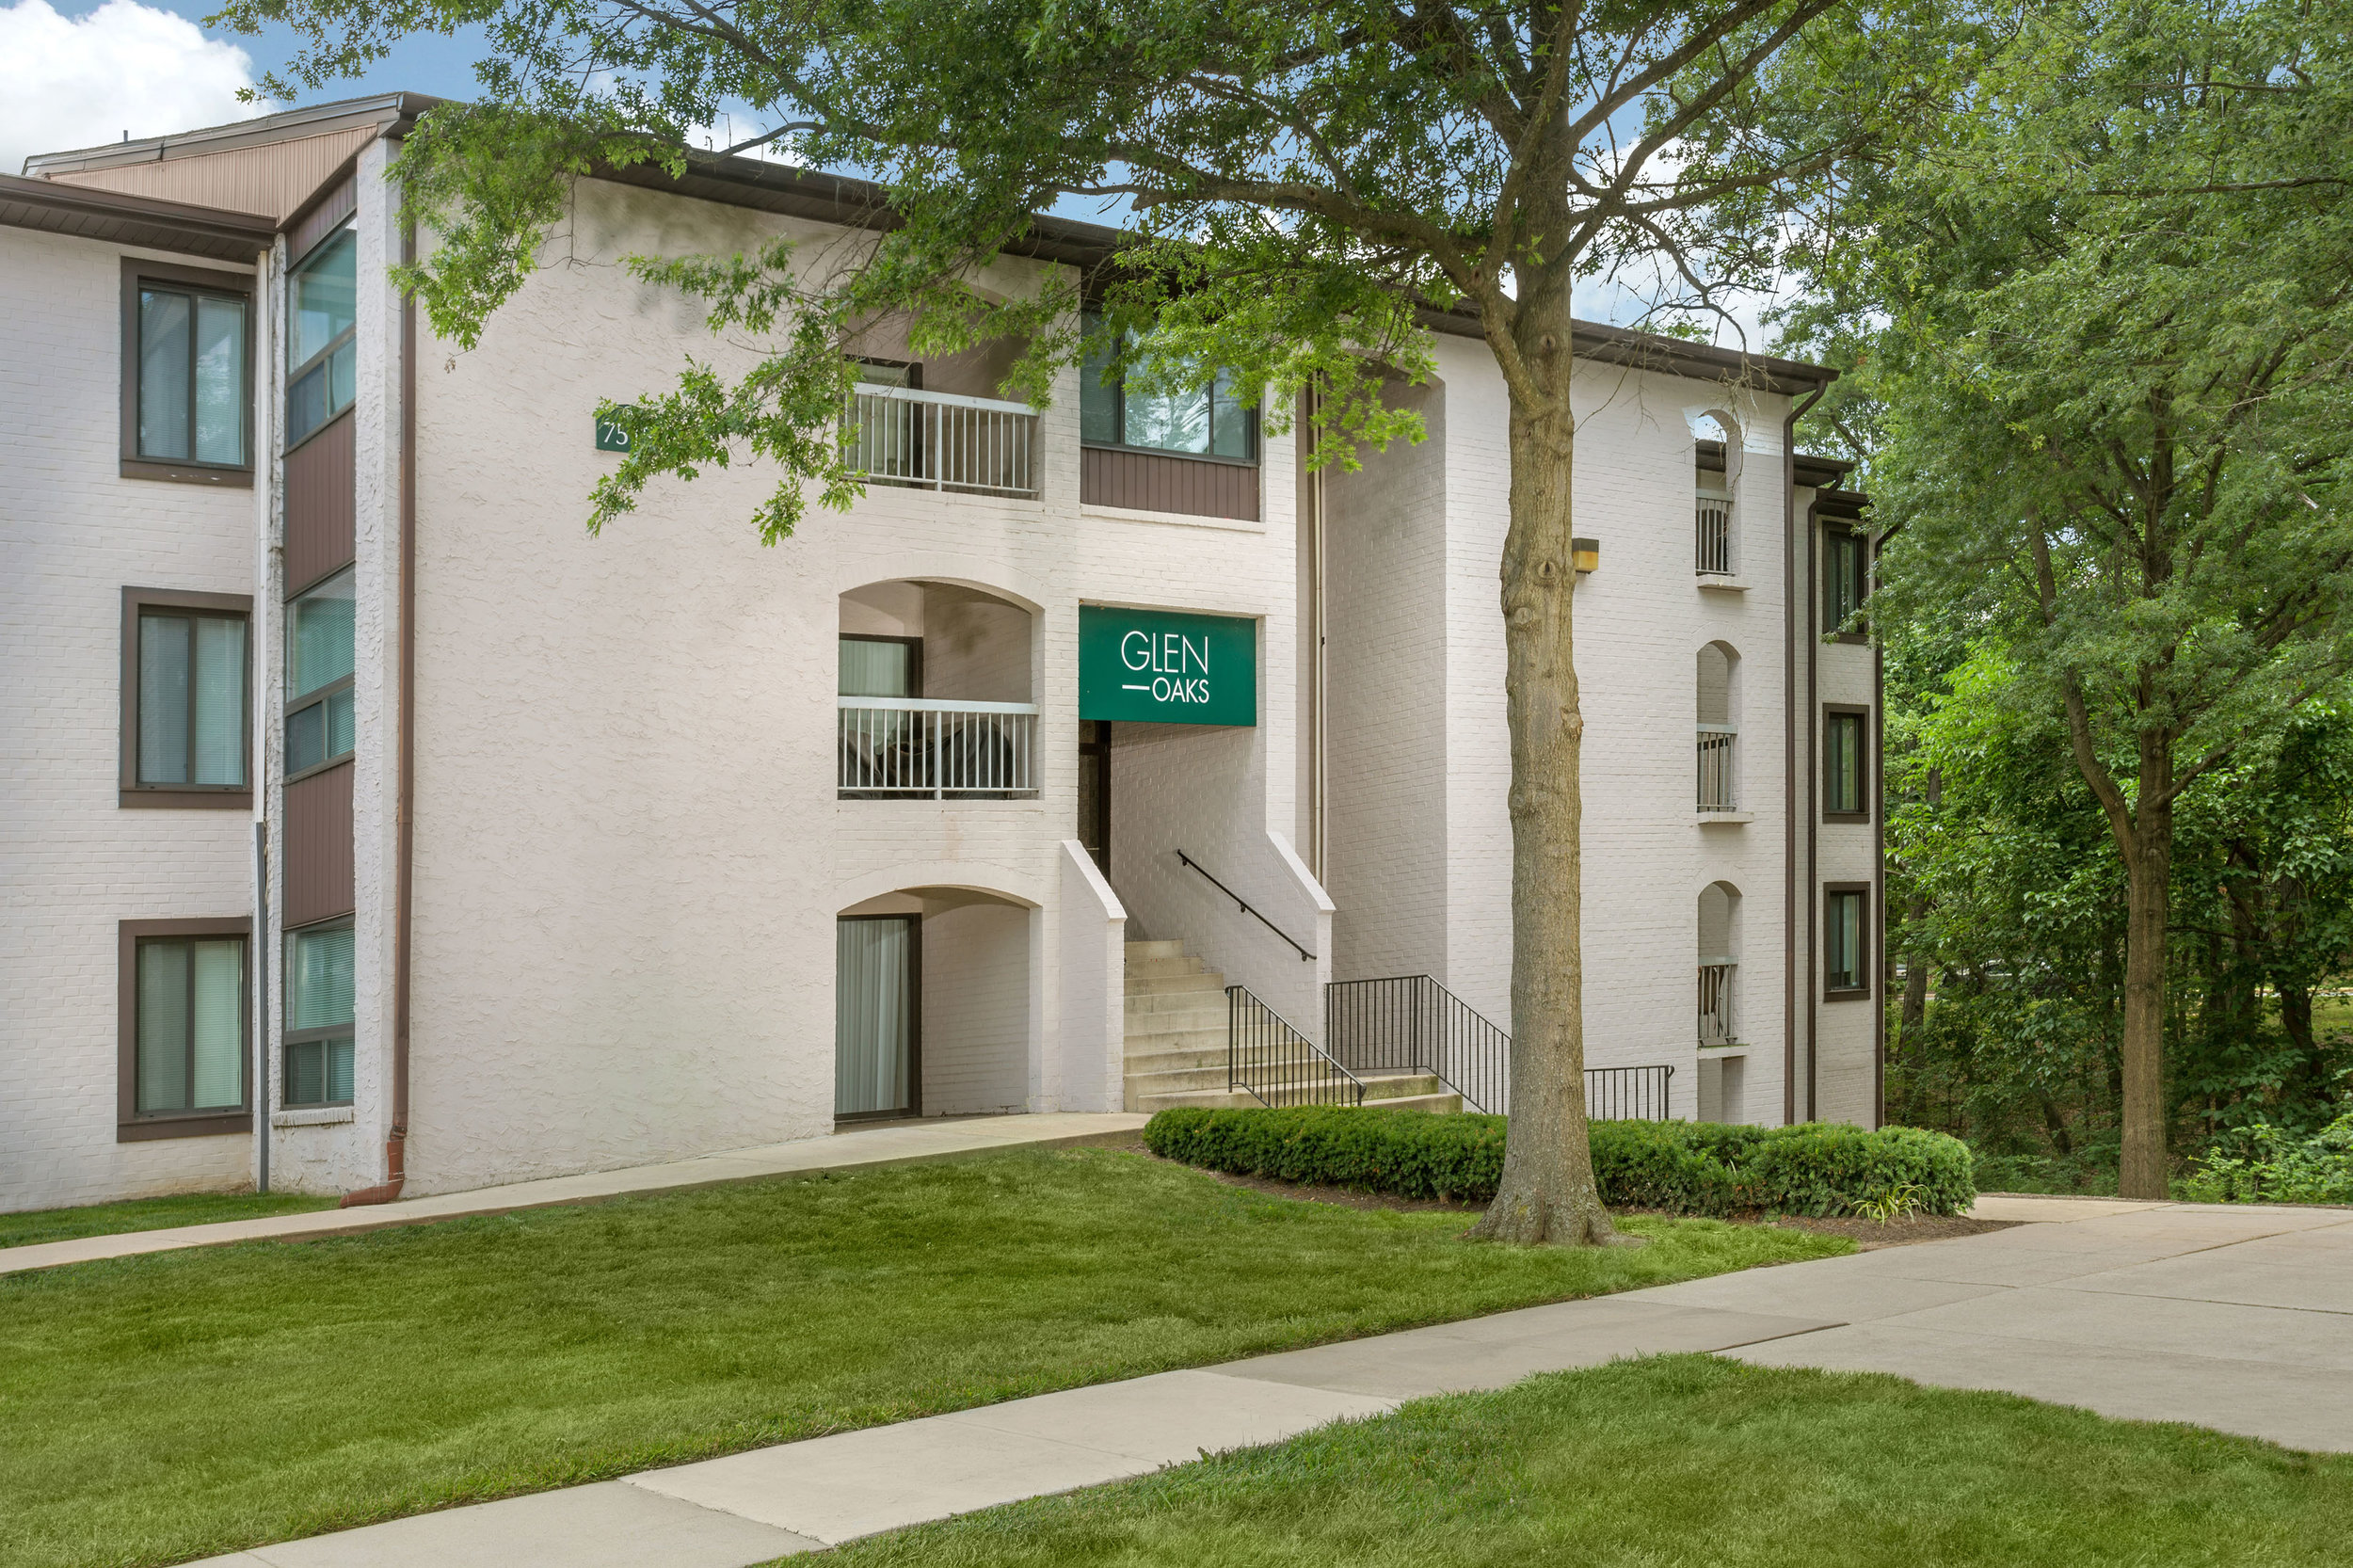 Exterior building view of Glen Oaks apartments with trees and grass all around